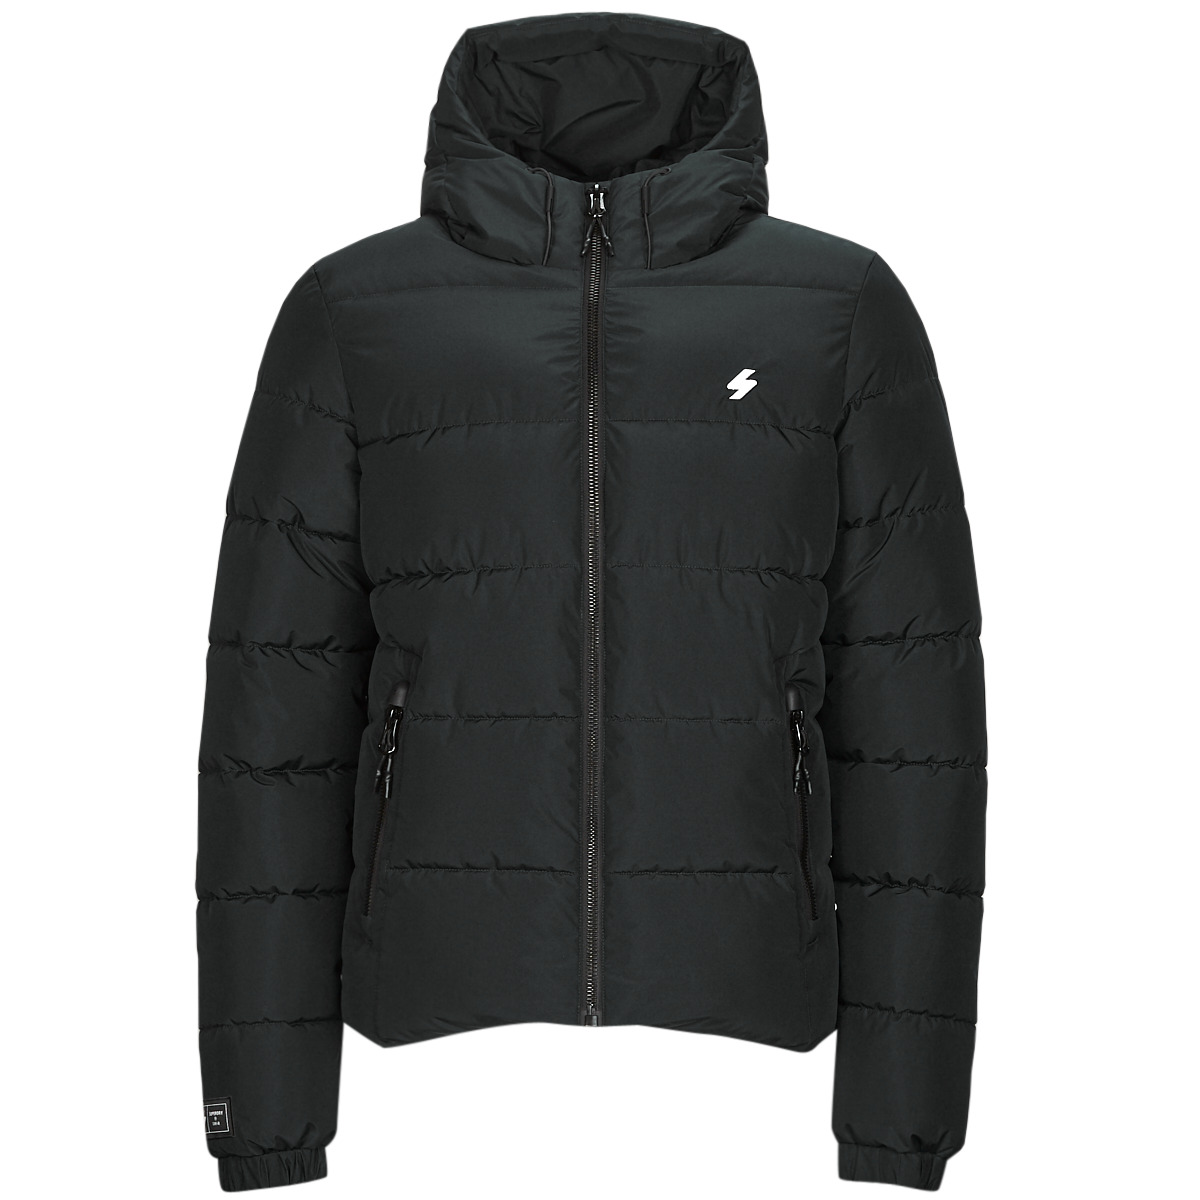 Superdry HOODED SPORTS - - NET JACKET Clothing Spartoo ! coats | Black PUFFR Duffel Free Men delivery